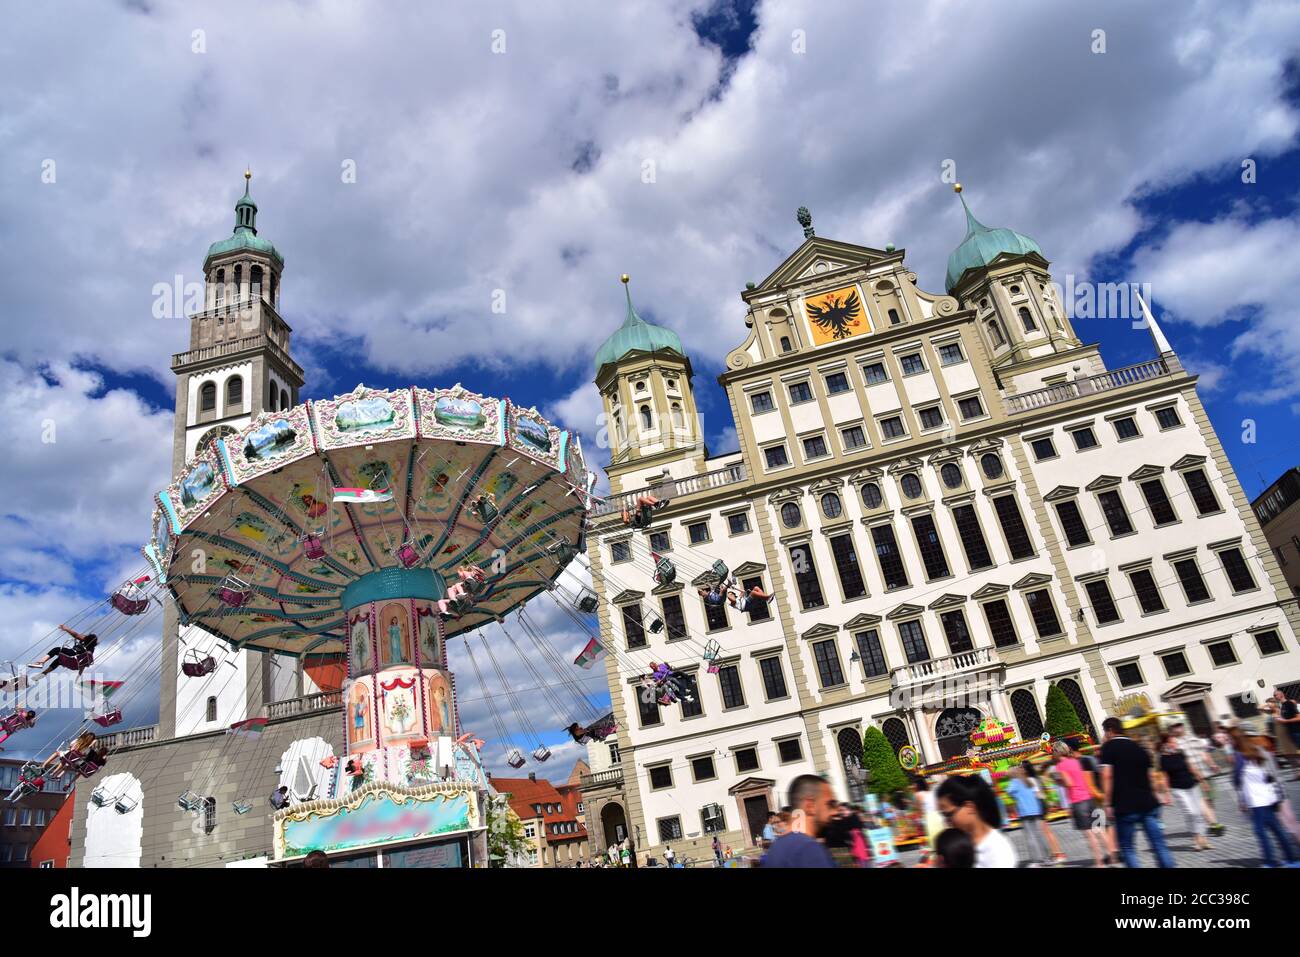 Chain carousel on the Augsburg town hall square in front of the town hall and the Perlach tower, Augsburg, Swabia, Bavaria, Germany, Europe Stock Photo